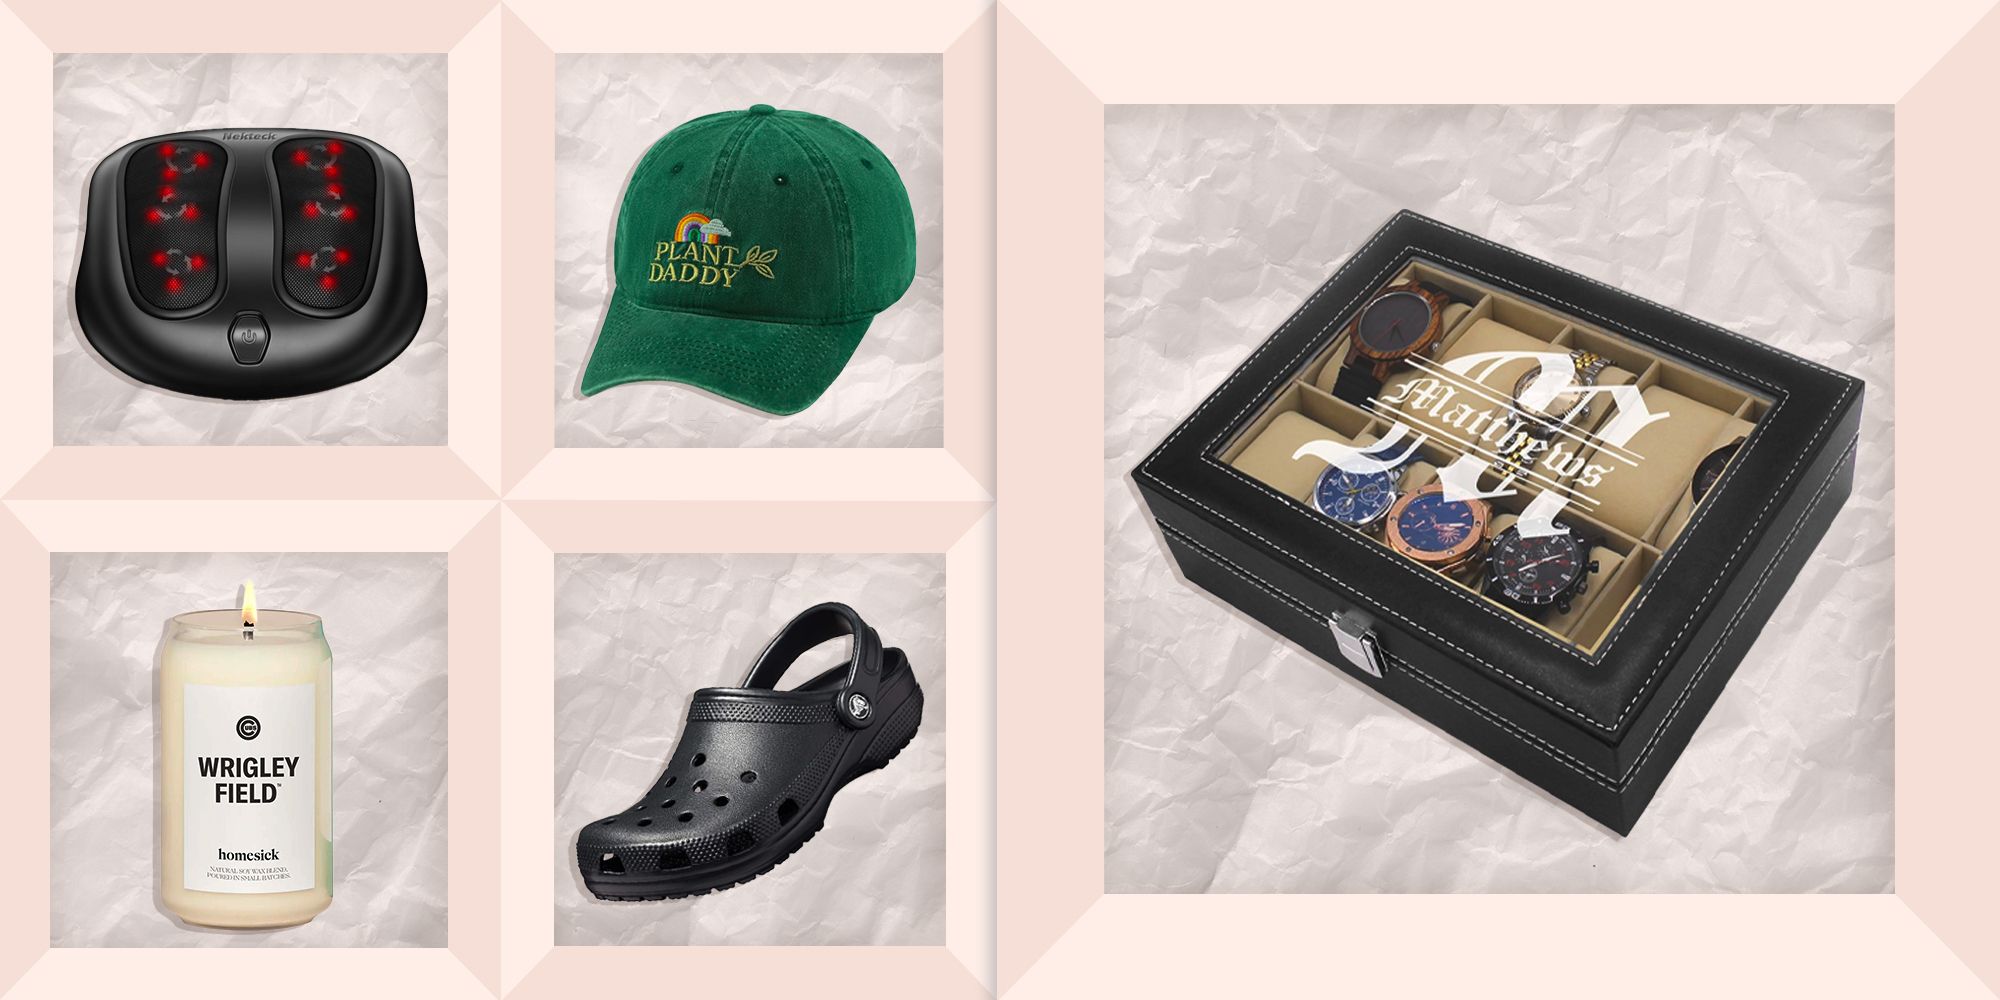 Best Gifts for Him Under $50 from ! - A Slice of Style